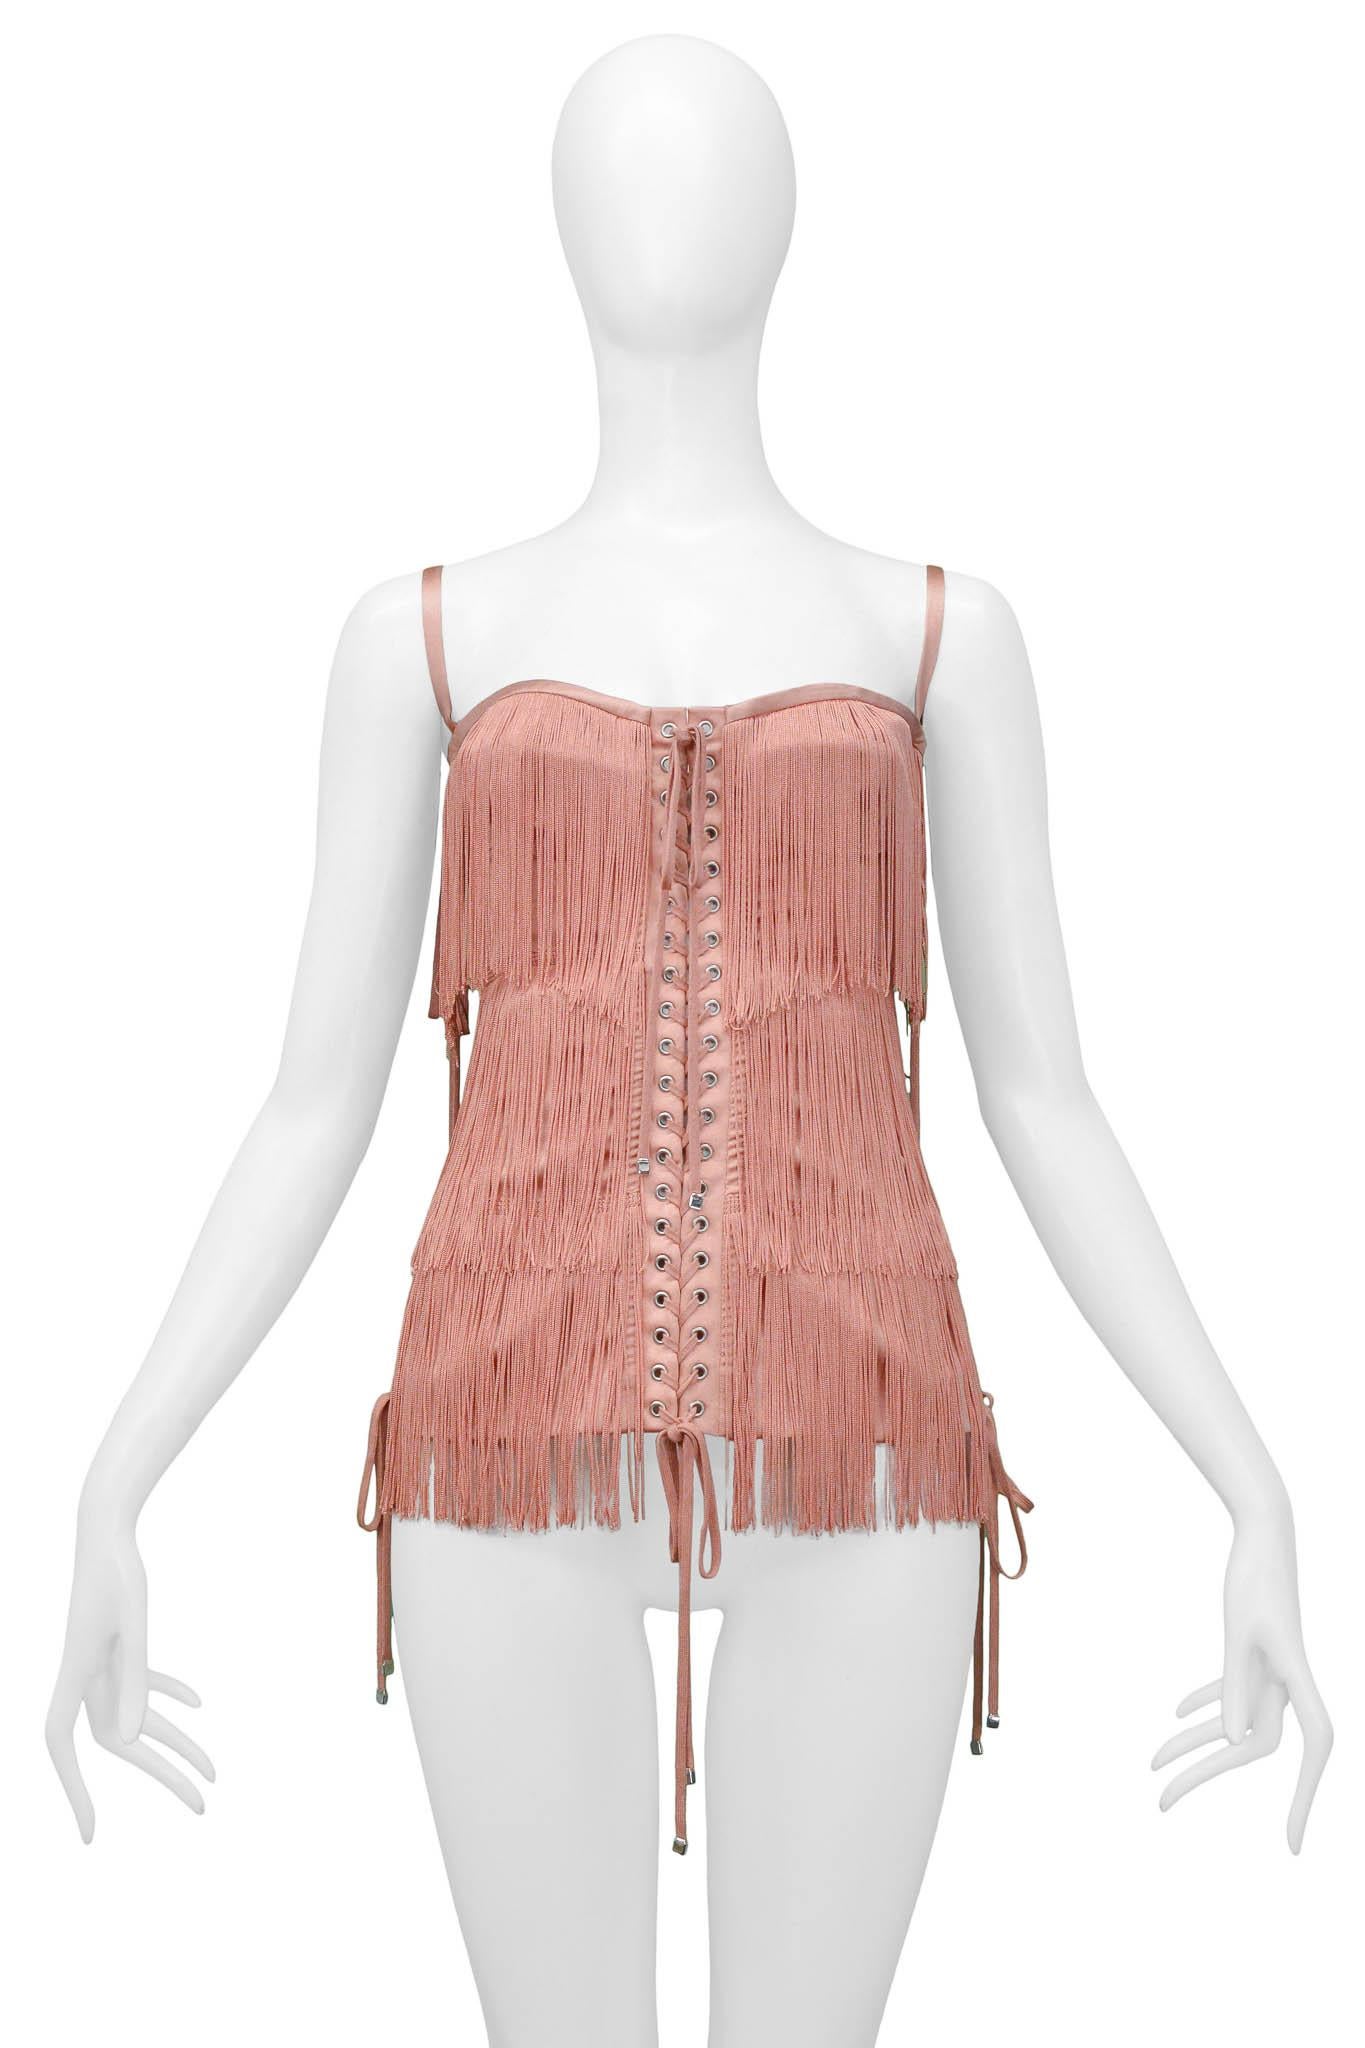 Resurrection Vintage is excited to offer a vintage Dolce & Gabbana pink fringe corset top featuring fringe all around the front and back of the garment, lace-up panels along the front, back, side seams, and a hidden zipper at the side seam.

Dolce &